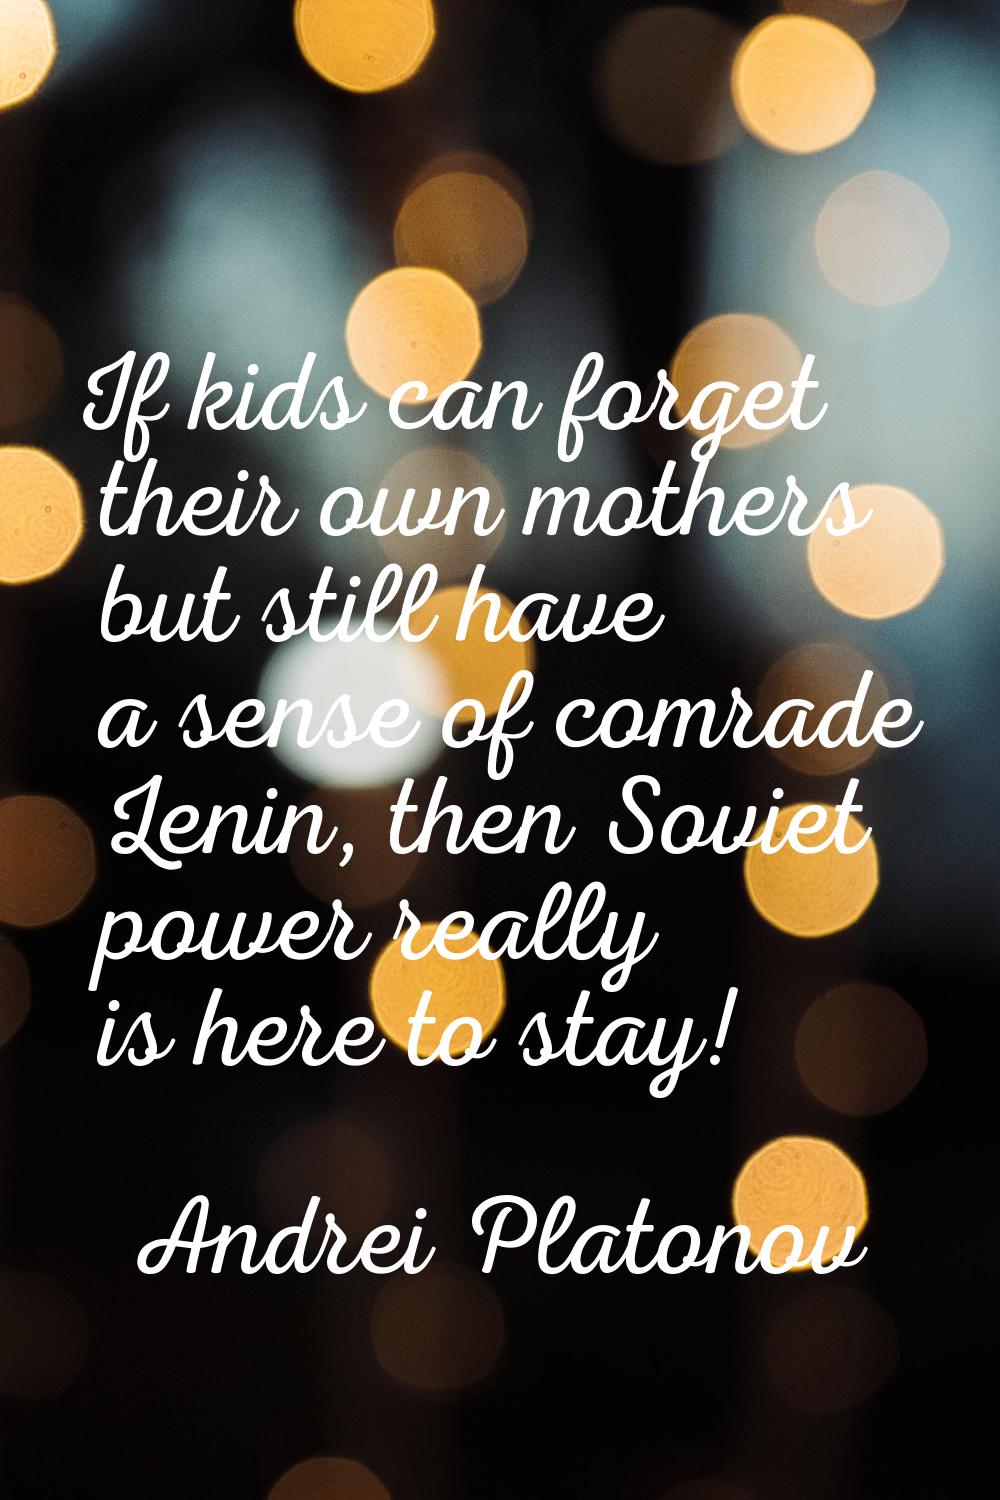 If kids can forget their own mothers but still have a sense of comrade Lenin, then Soviet power rea